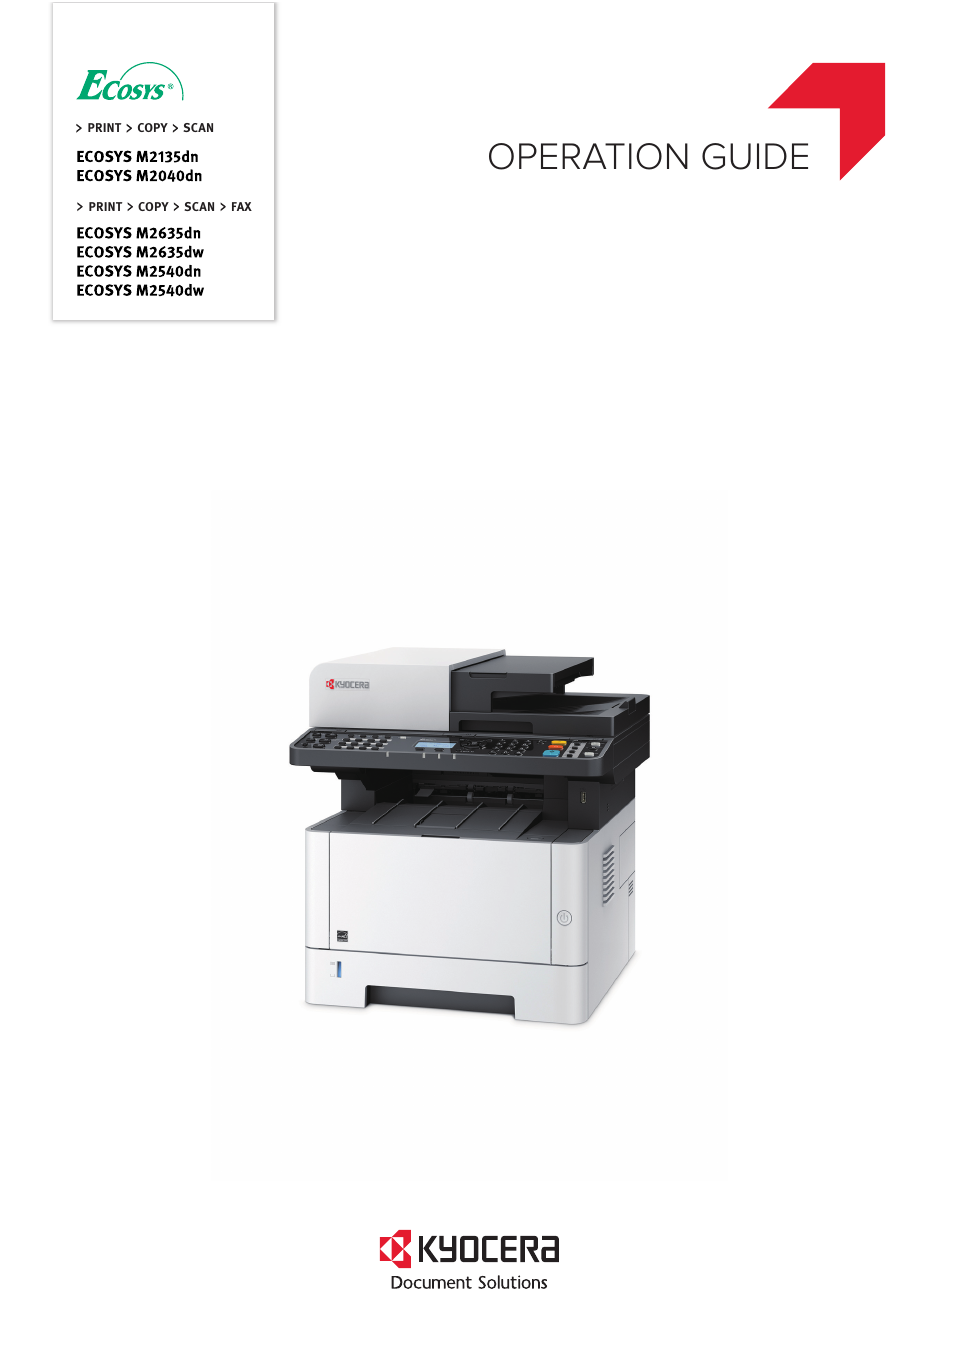 Kyocera Ecosys m2040dn User Manual | 410 pages | Also for: ECOSYS M2135dn,  ECOSYS M2635dn, ECOSYS M2540dn